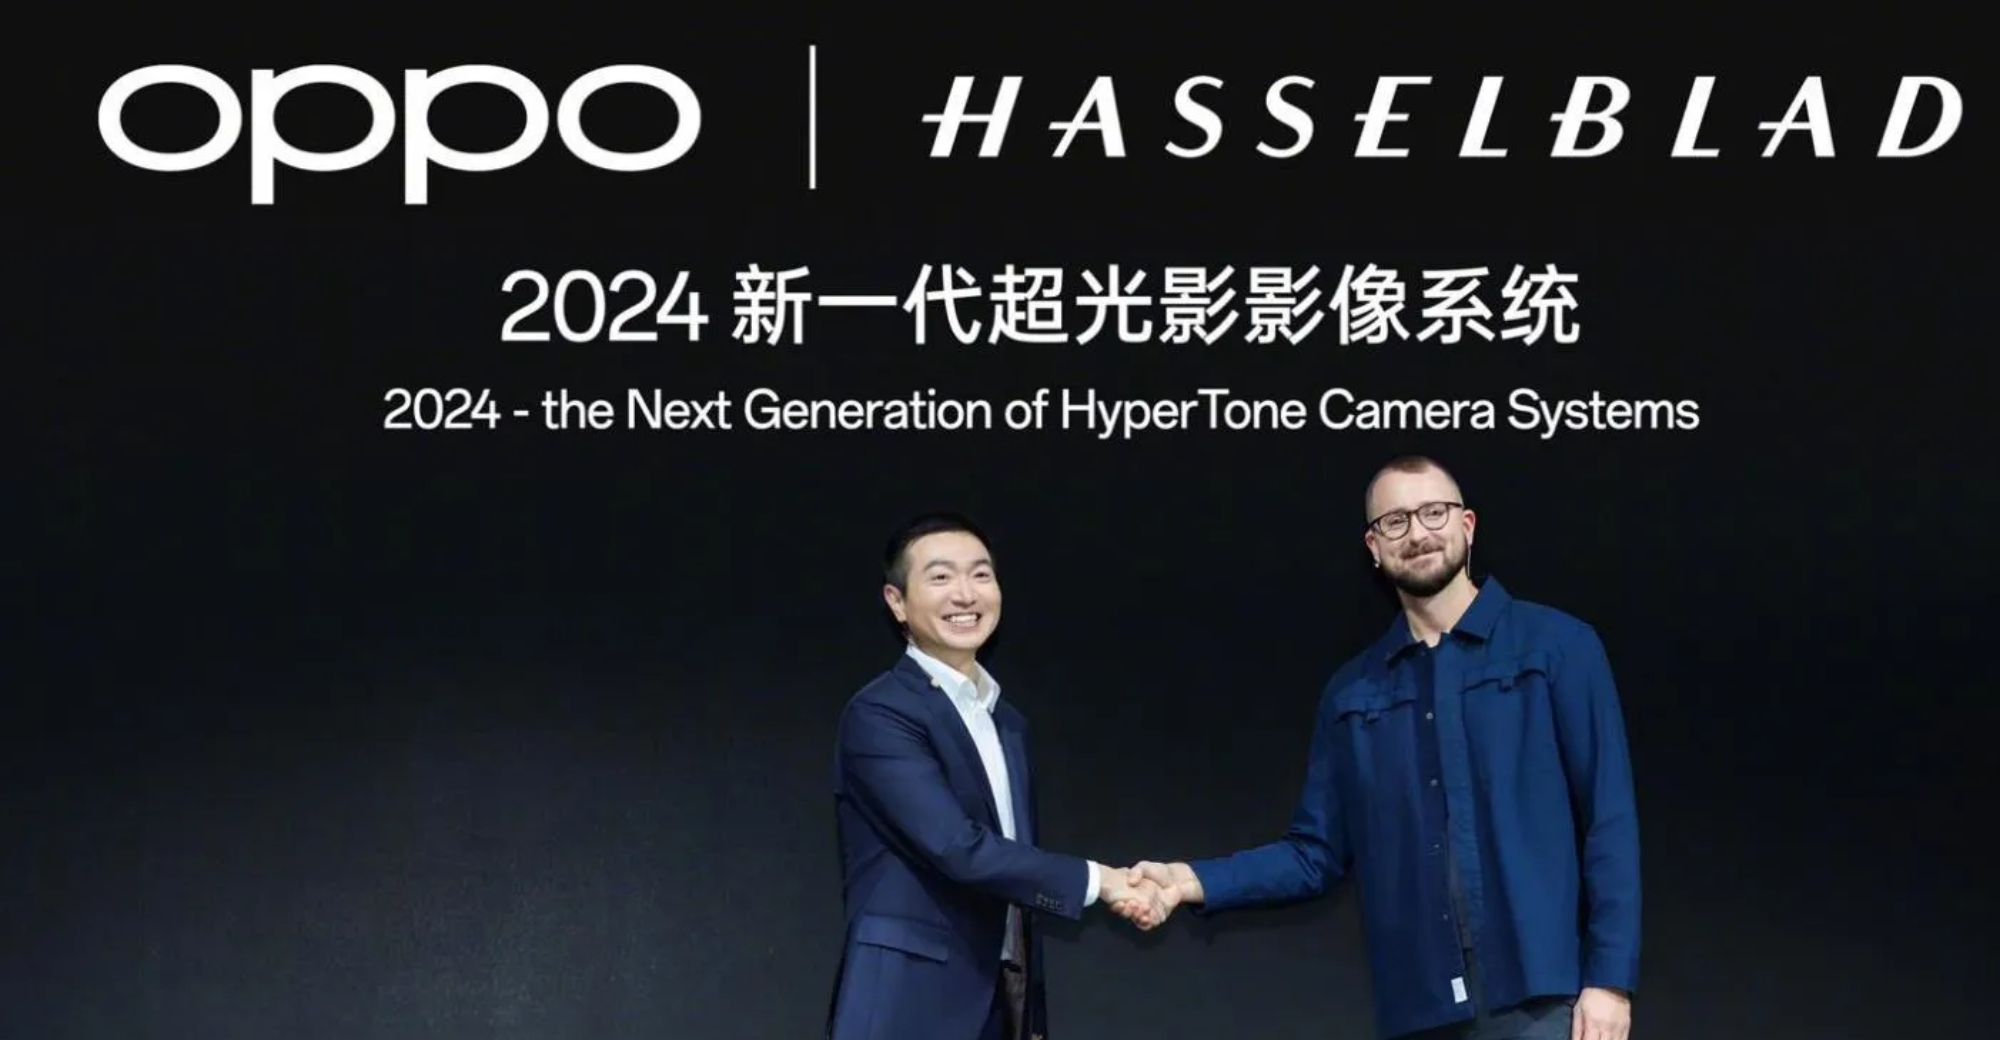 OPPO and Hasselblad Collaborate on the Next Generation Hyper Tone Camera Systems, Debuting on the Find X7 Series Smartphones